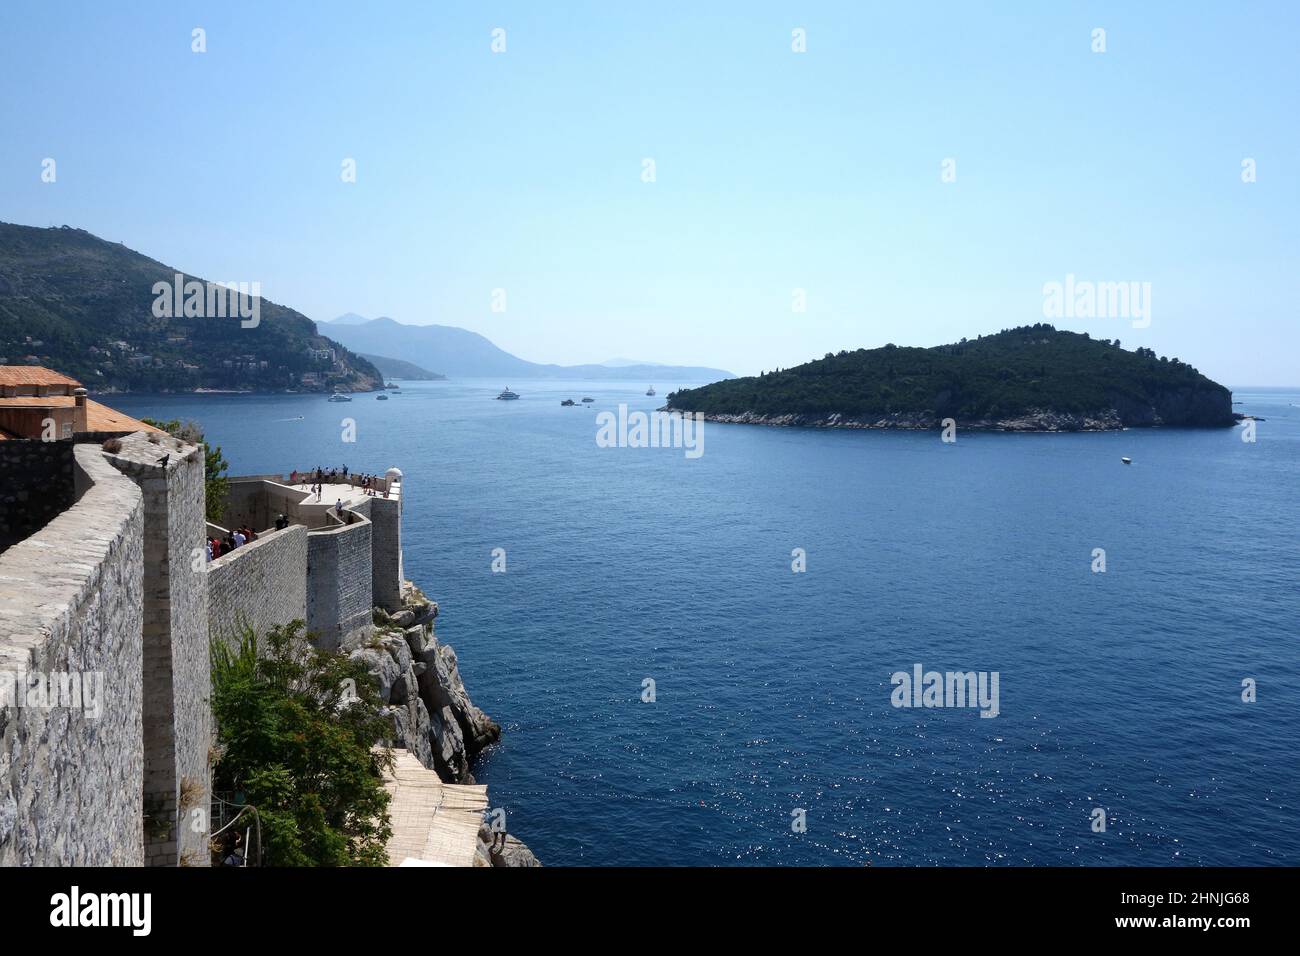 View of Lokrum Island from the Dubrovnik old town walls looking out over the Adriatic Sea. Stock Photo